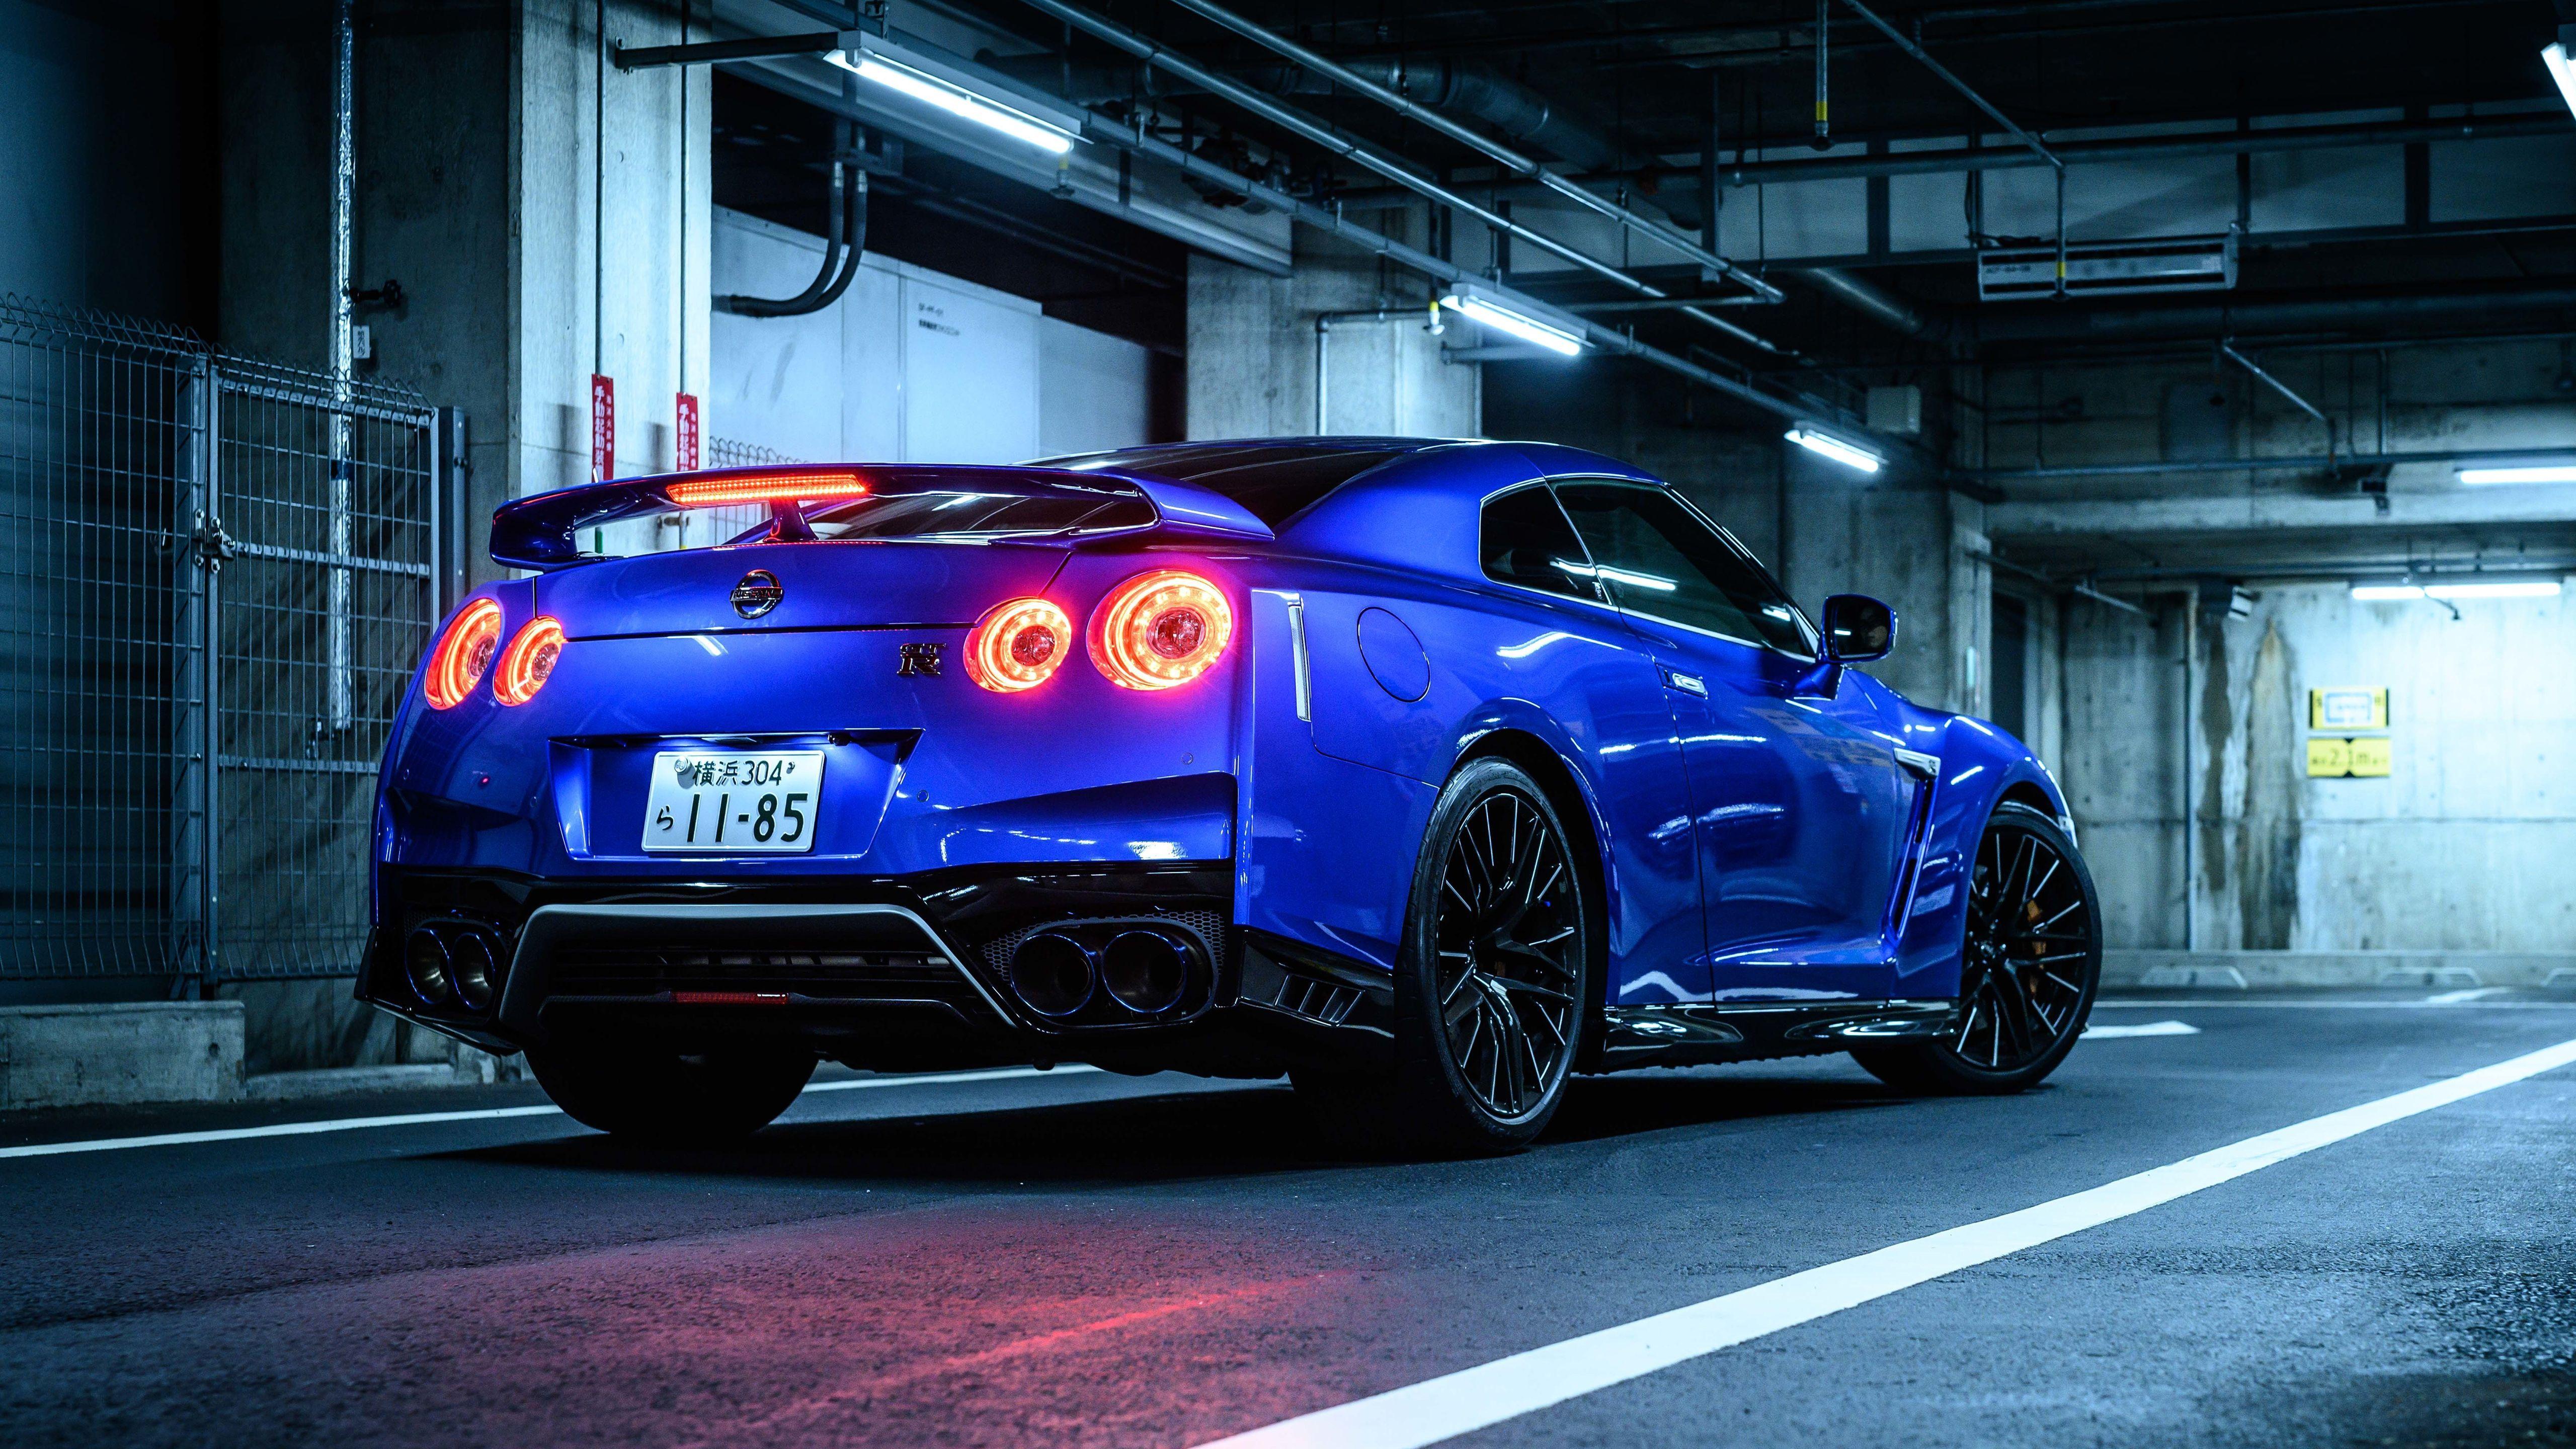 Nissan GT-R Sports 2020 Wallpapers - Top Free Nissan GT-R Sports 2020